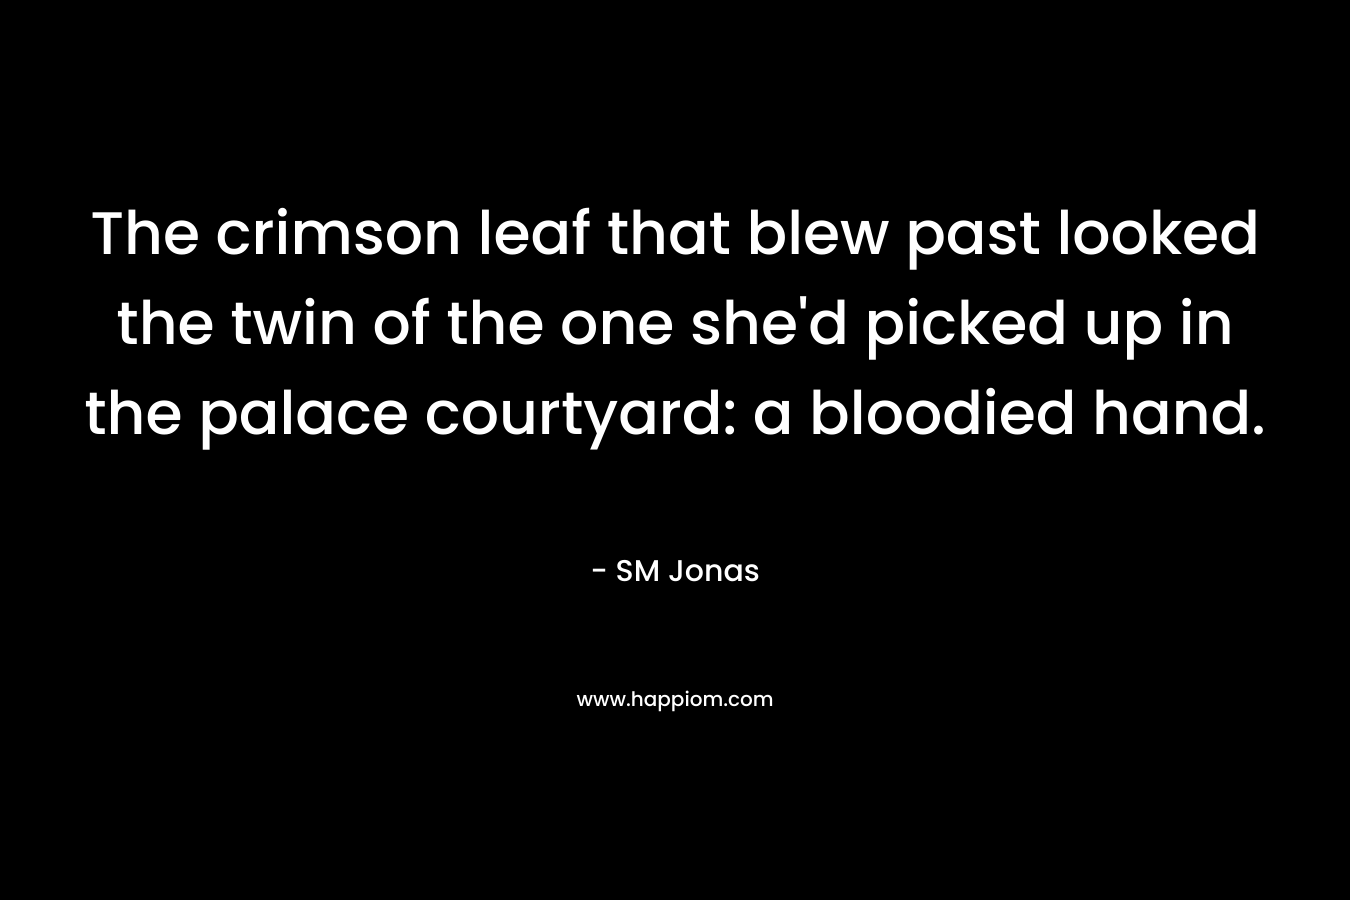 The crimson leaf that blew past looked the twin of the one she'd picked up in the palace courtyard: a bloodied hand.